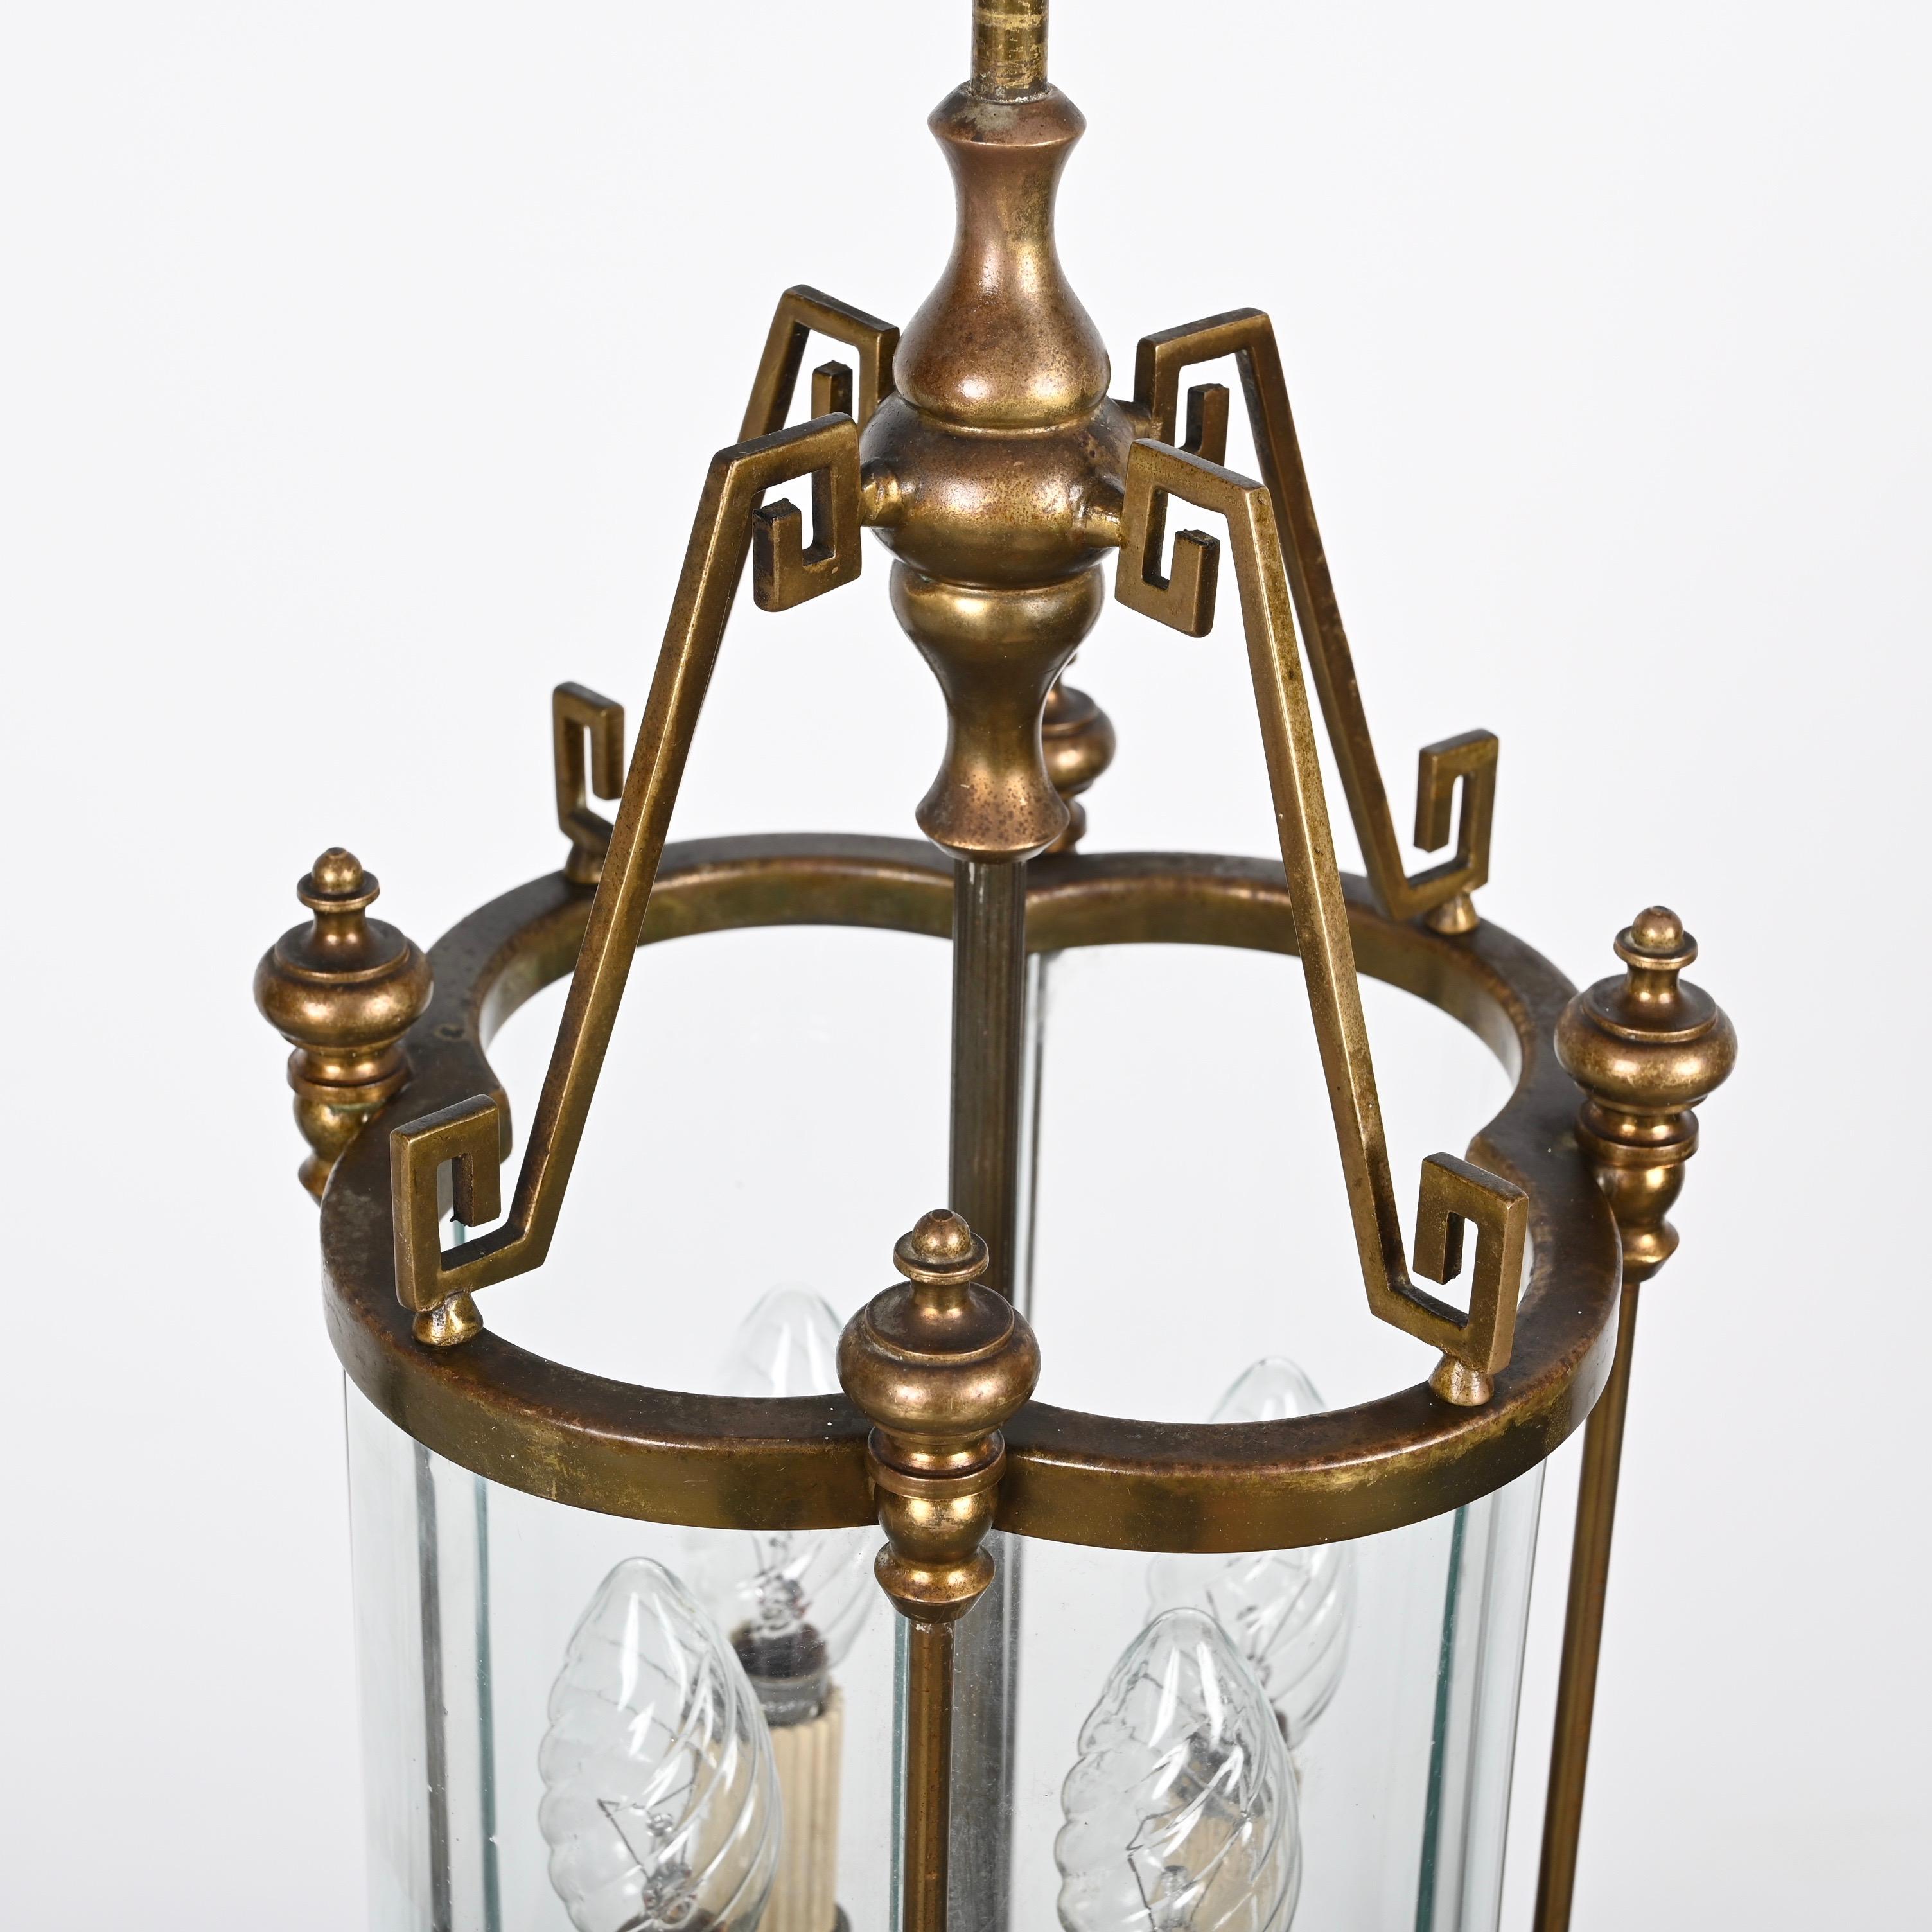 Art Deco Brass and Semicircular Glass Italian Chandelier after Adolf Loos, 1950s For Sale 12